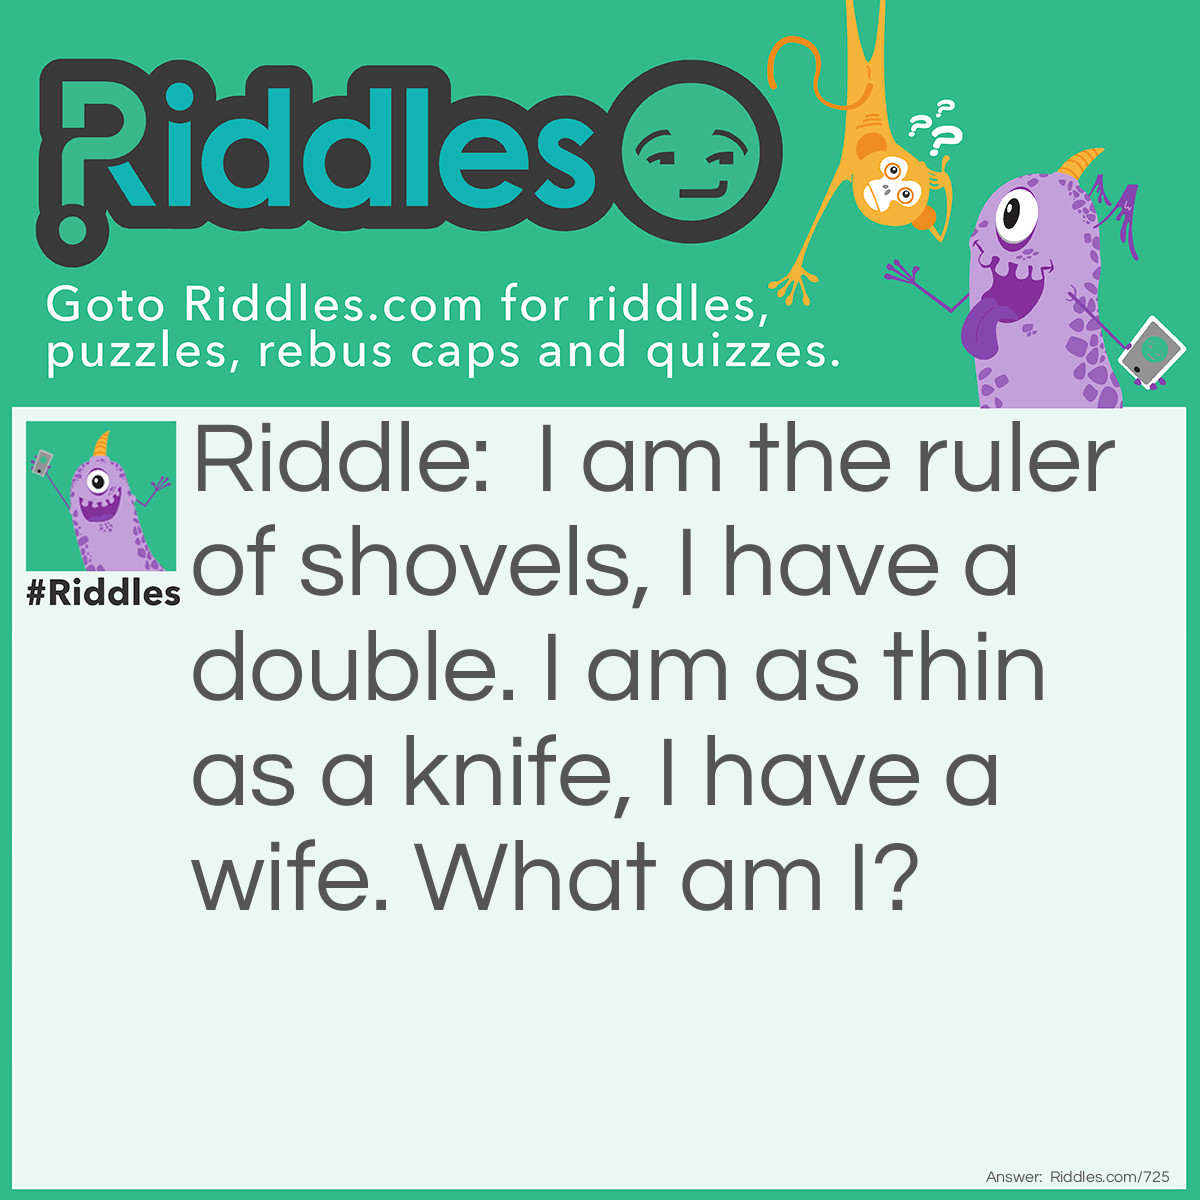 Riddle: I am the ruler of shovels, I have a double. I am as thin as a knife, I have a wife. What am I? Answer: The King of Spades (from a deck of cards).